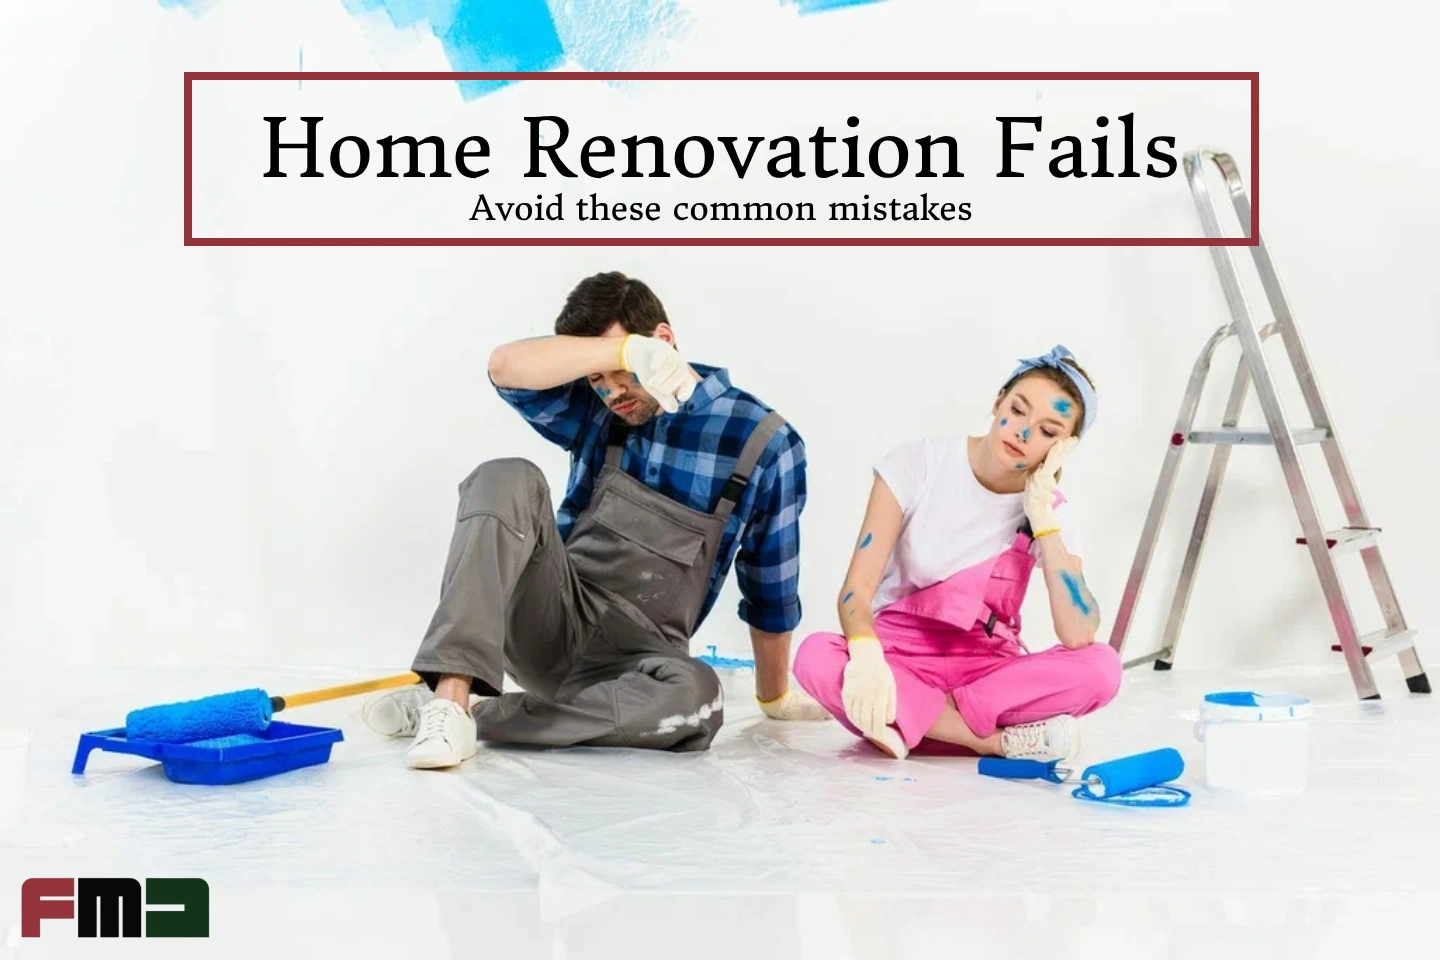 Top 3 home renovation fails and how to avoid them